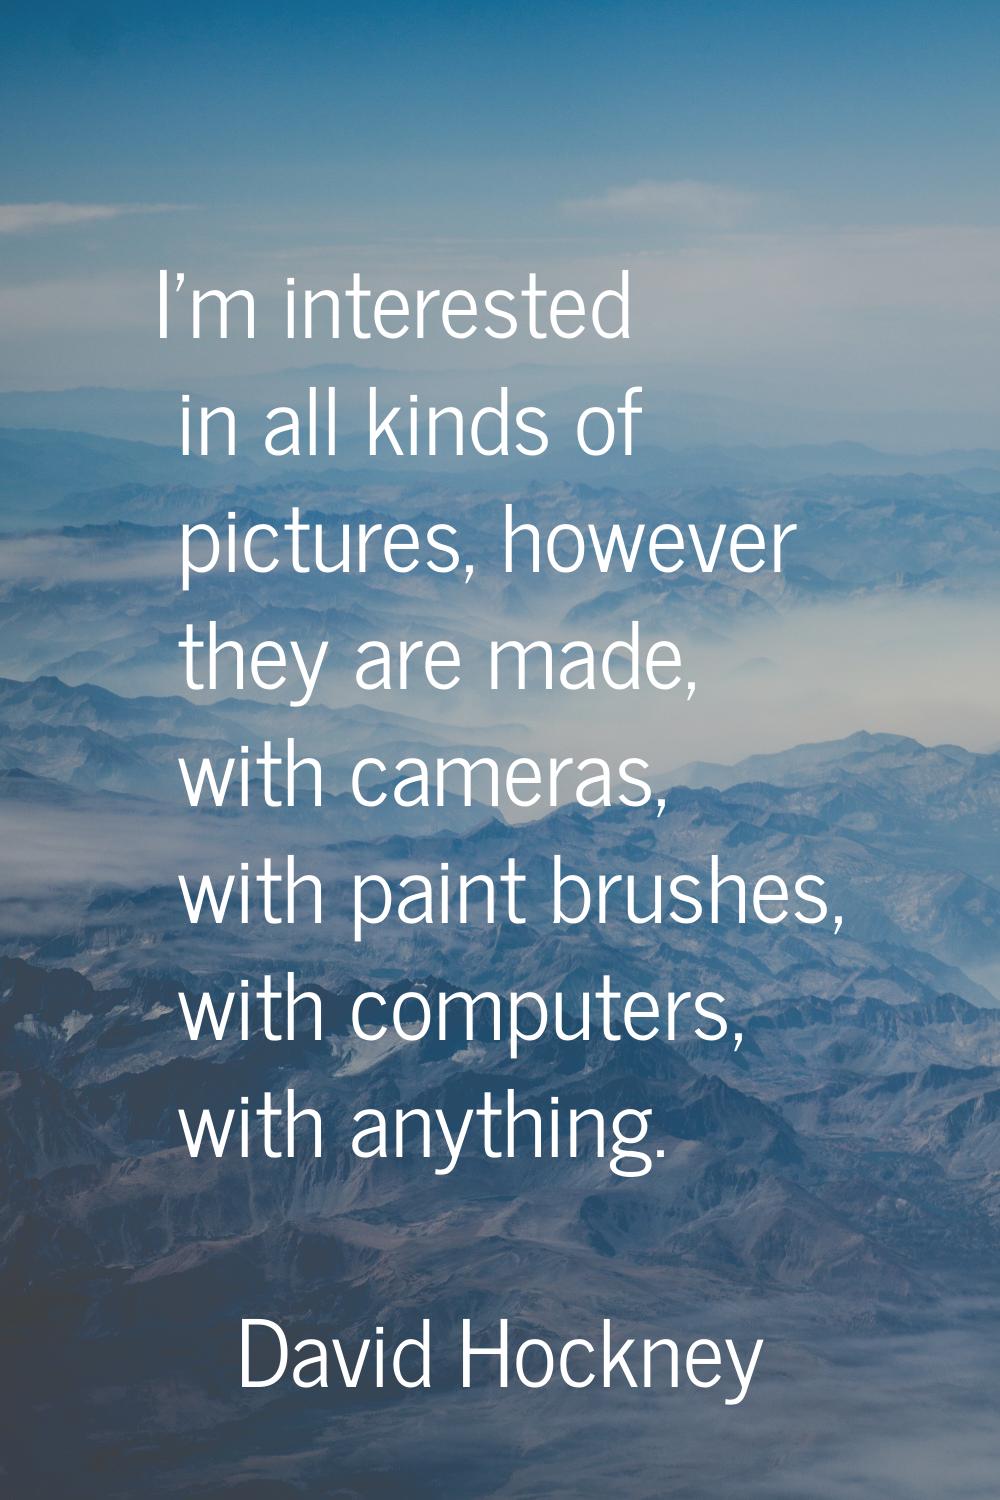 I'm interested in all kinds of pictures, however they are made, with cameras, with paint brushes, w